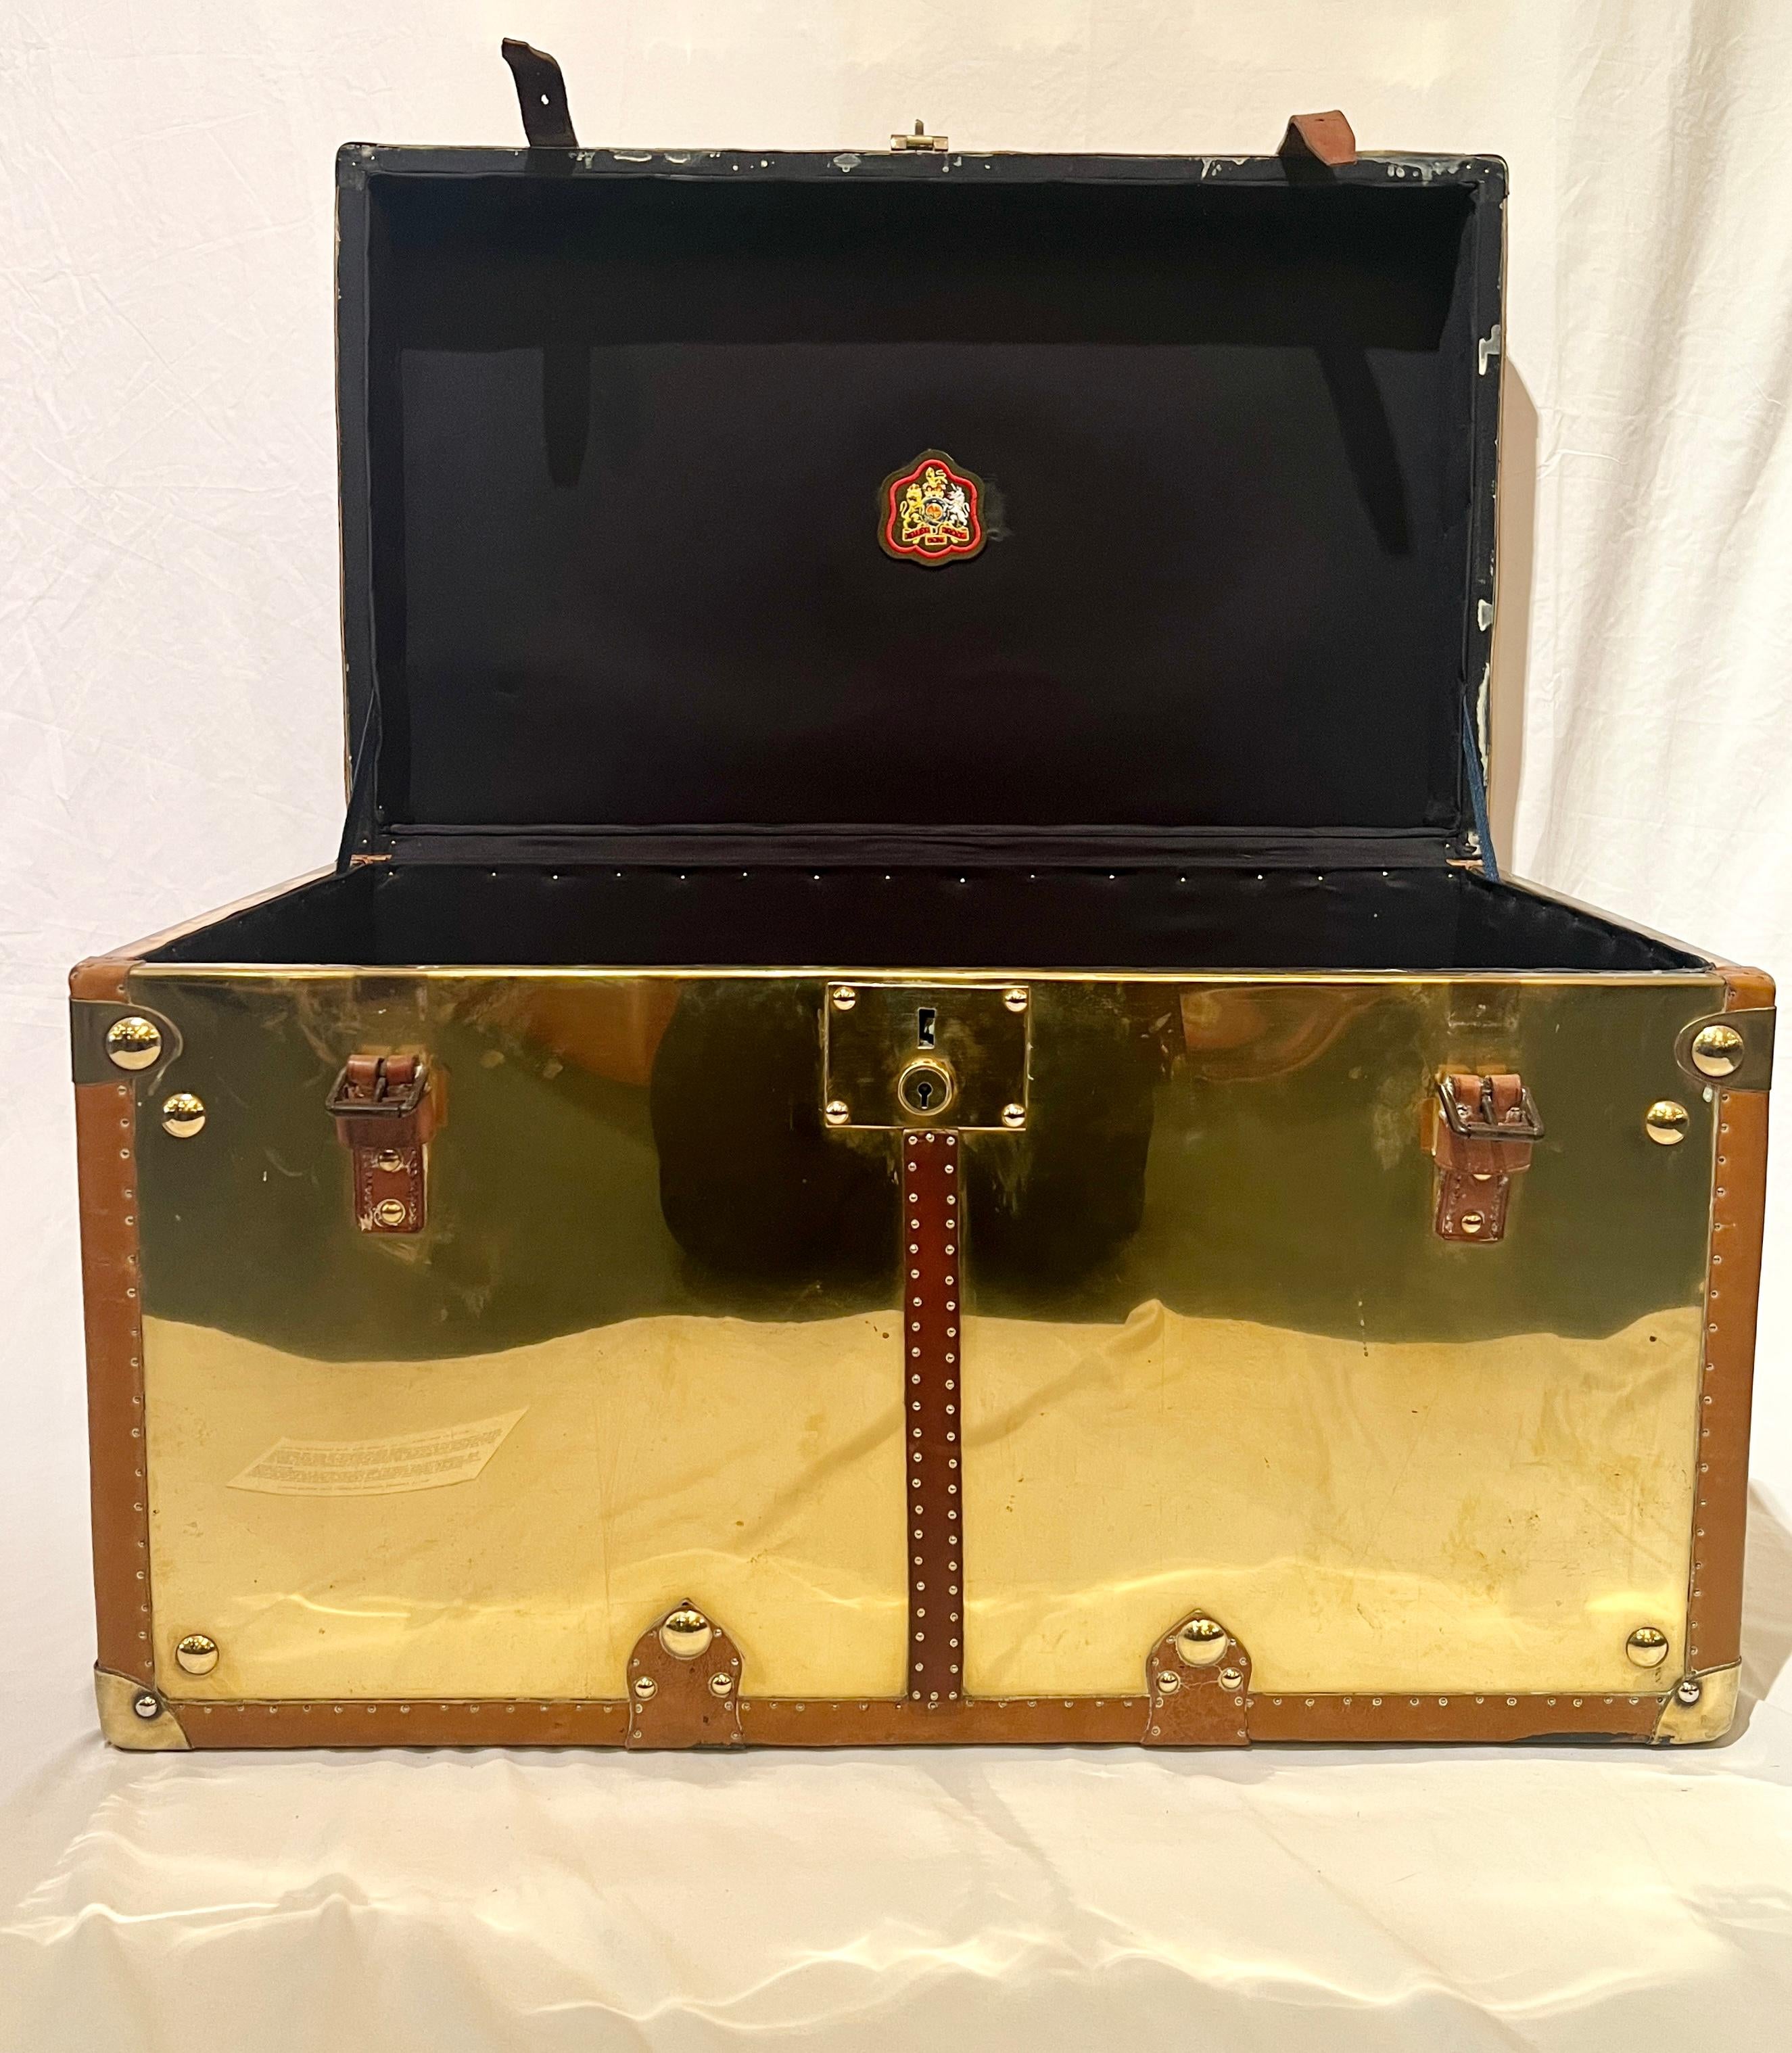 English Large Antique British Leather & Brass Military Trunk, Circa 1910's-1920's.